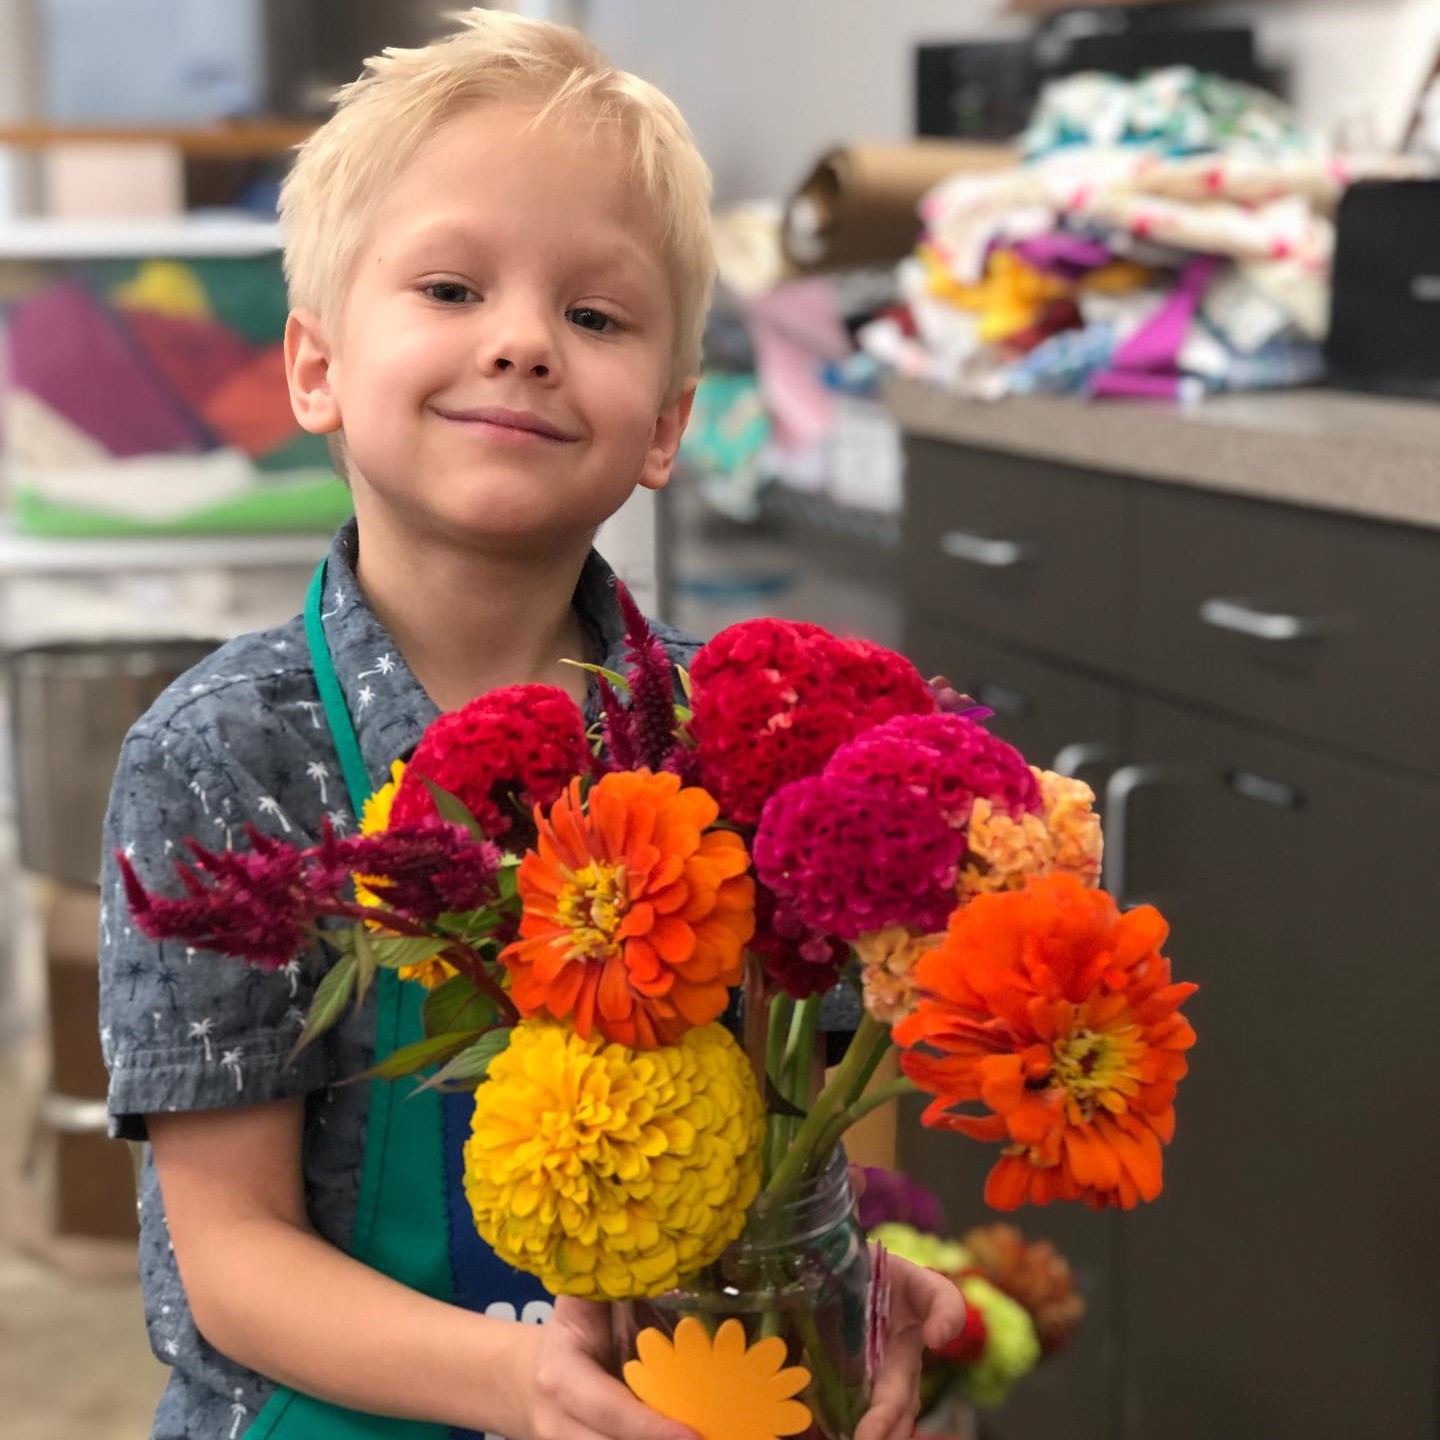 A boy holding a bouquet of flowers